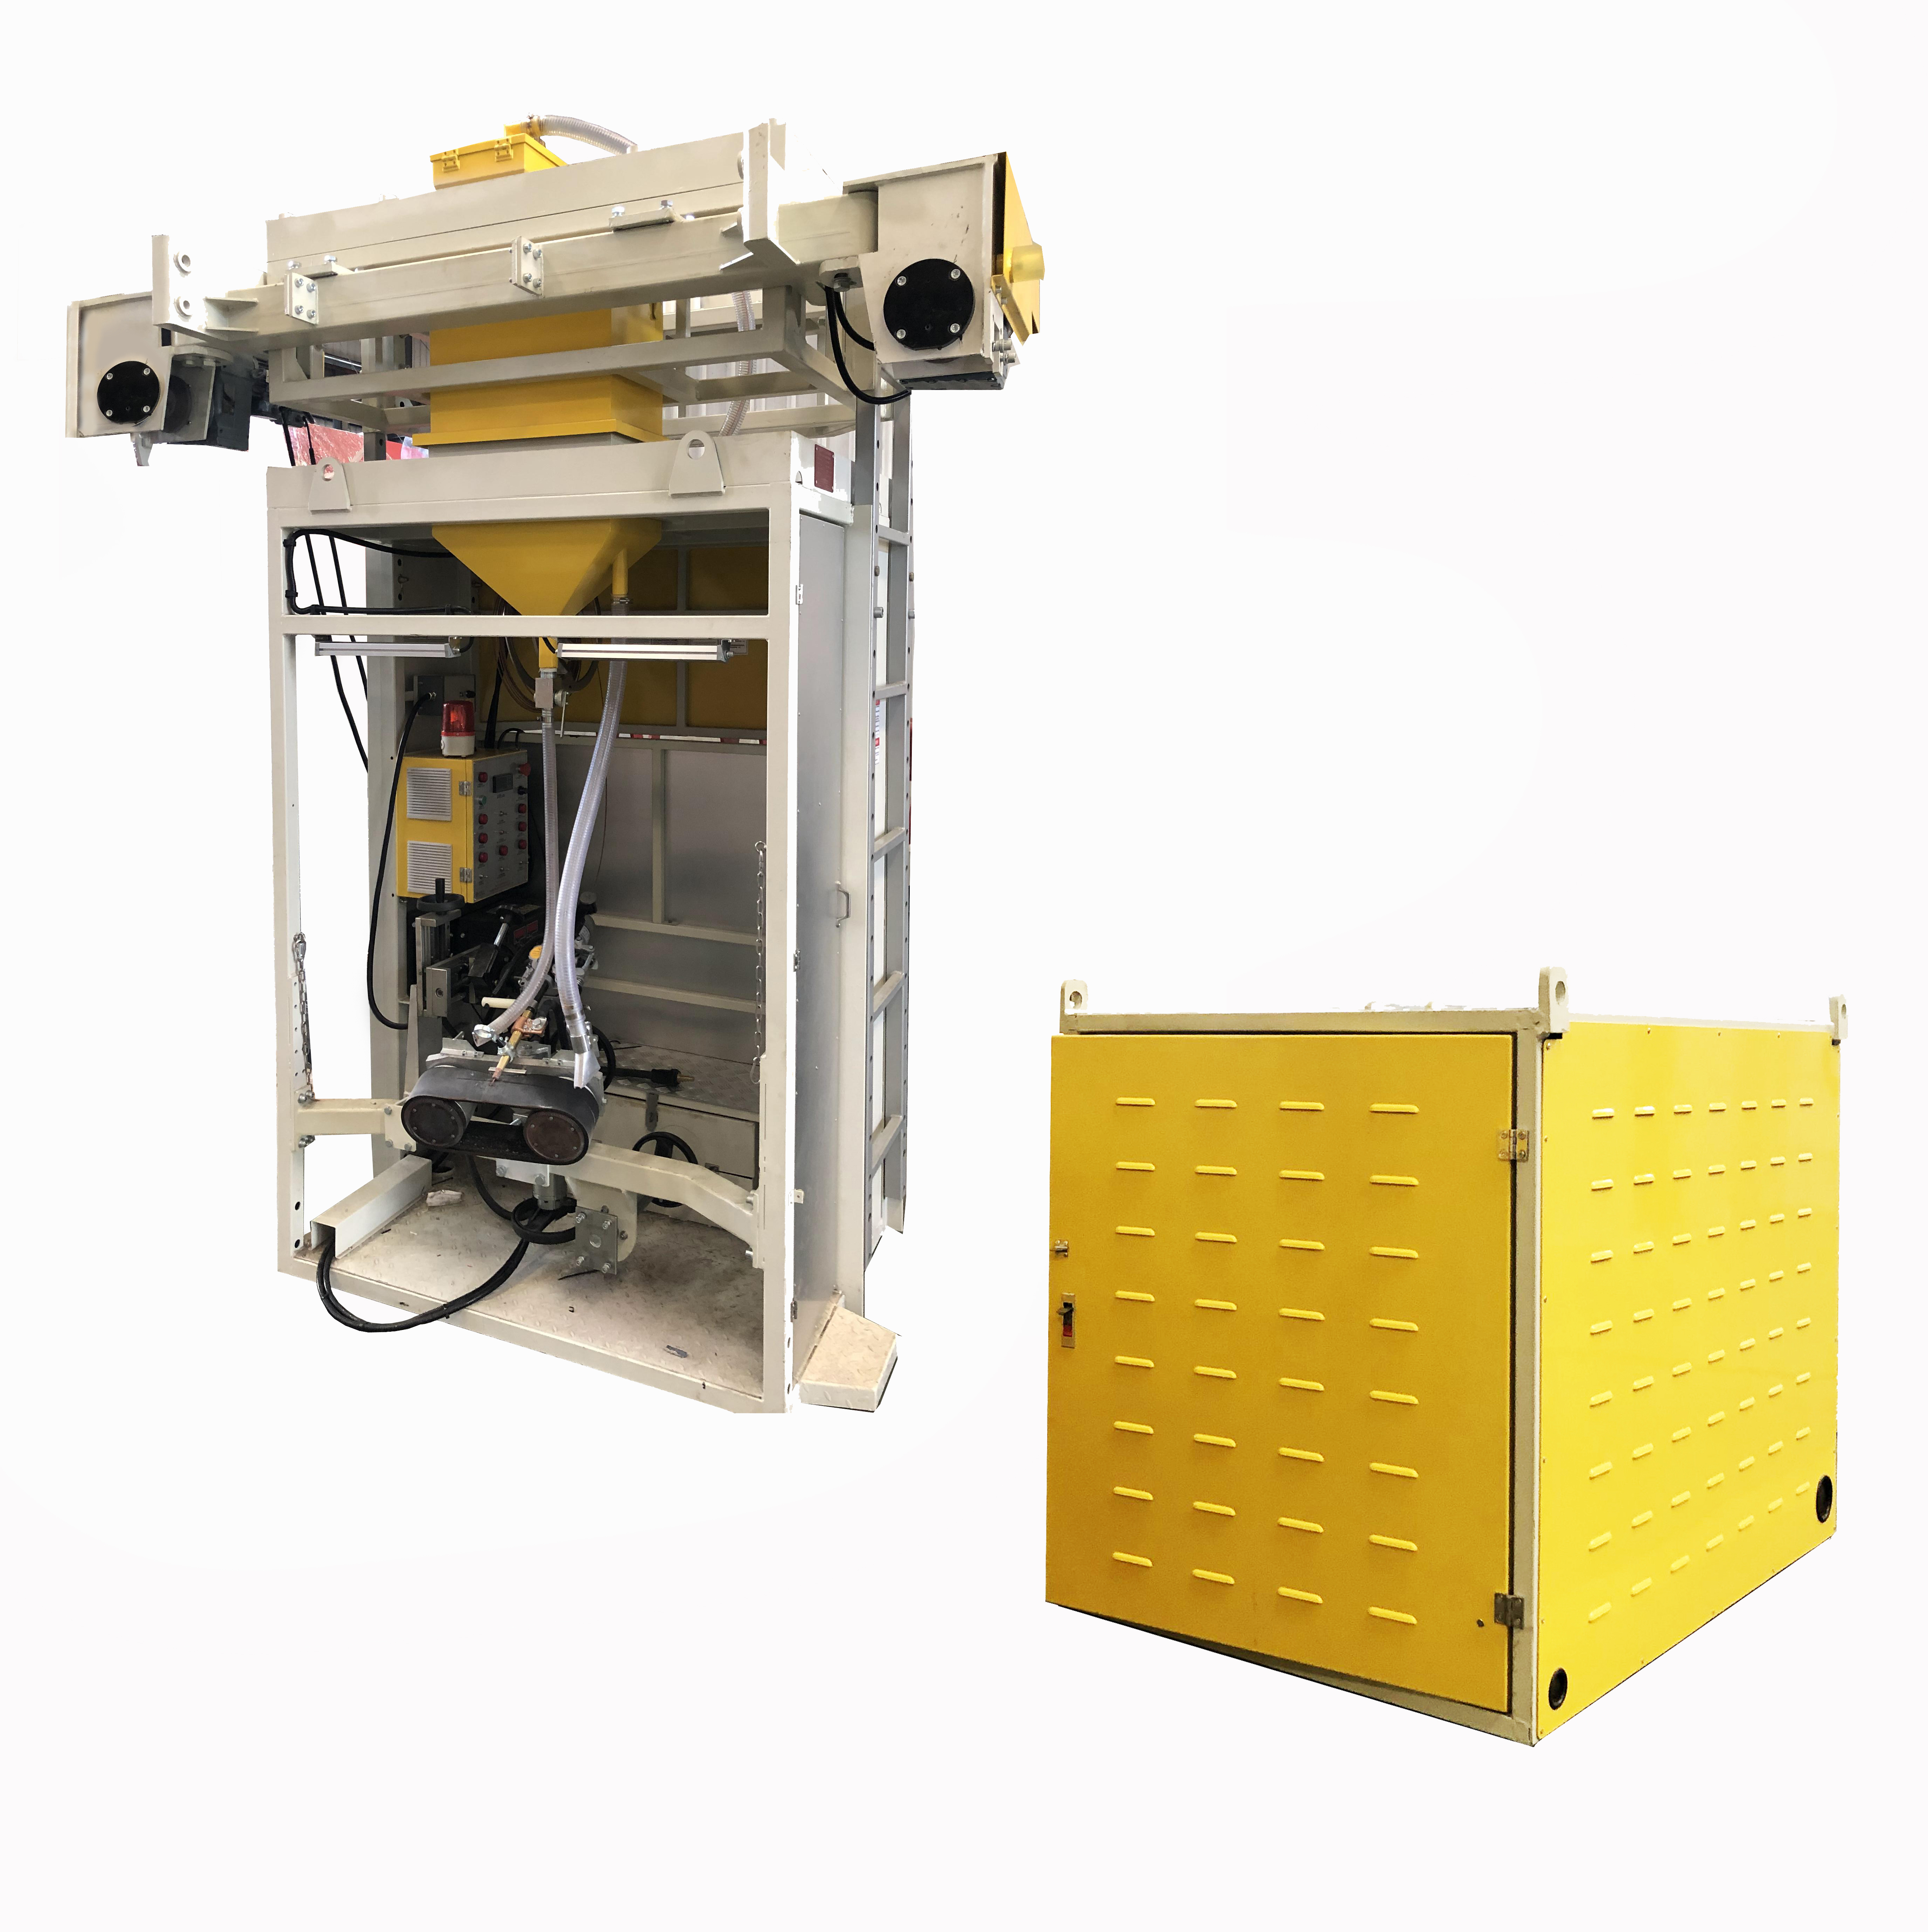 High Efficiency Storage Tank Transverse Welder with Single-sided Welding Double-sided Molding